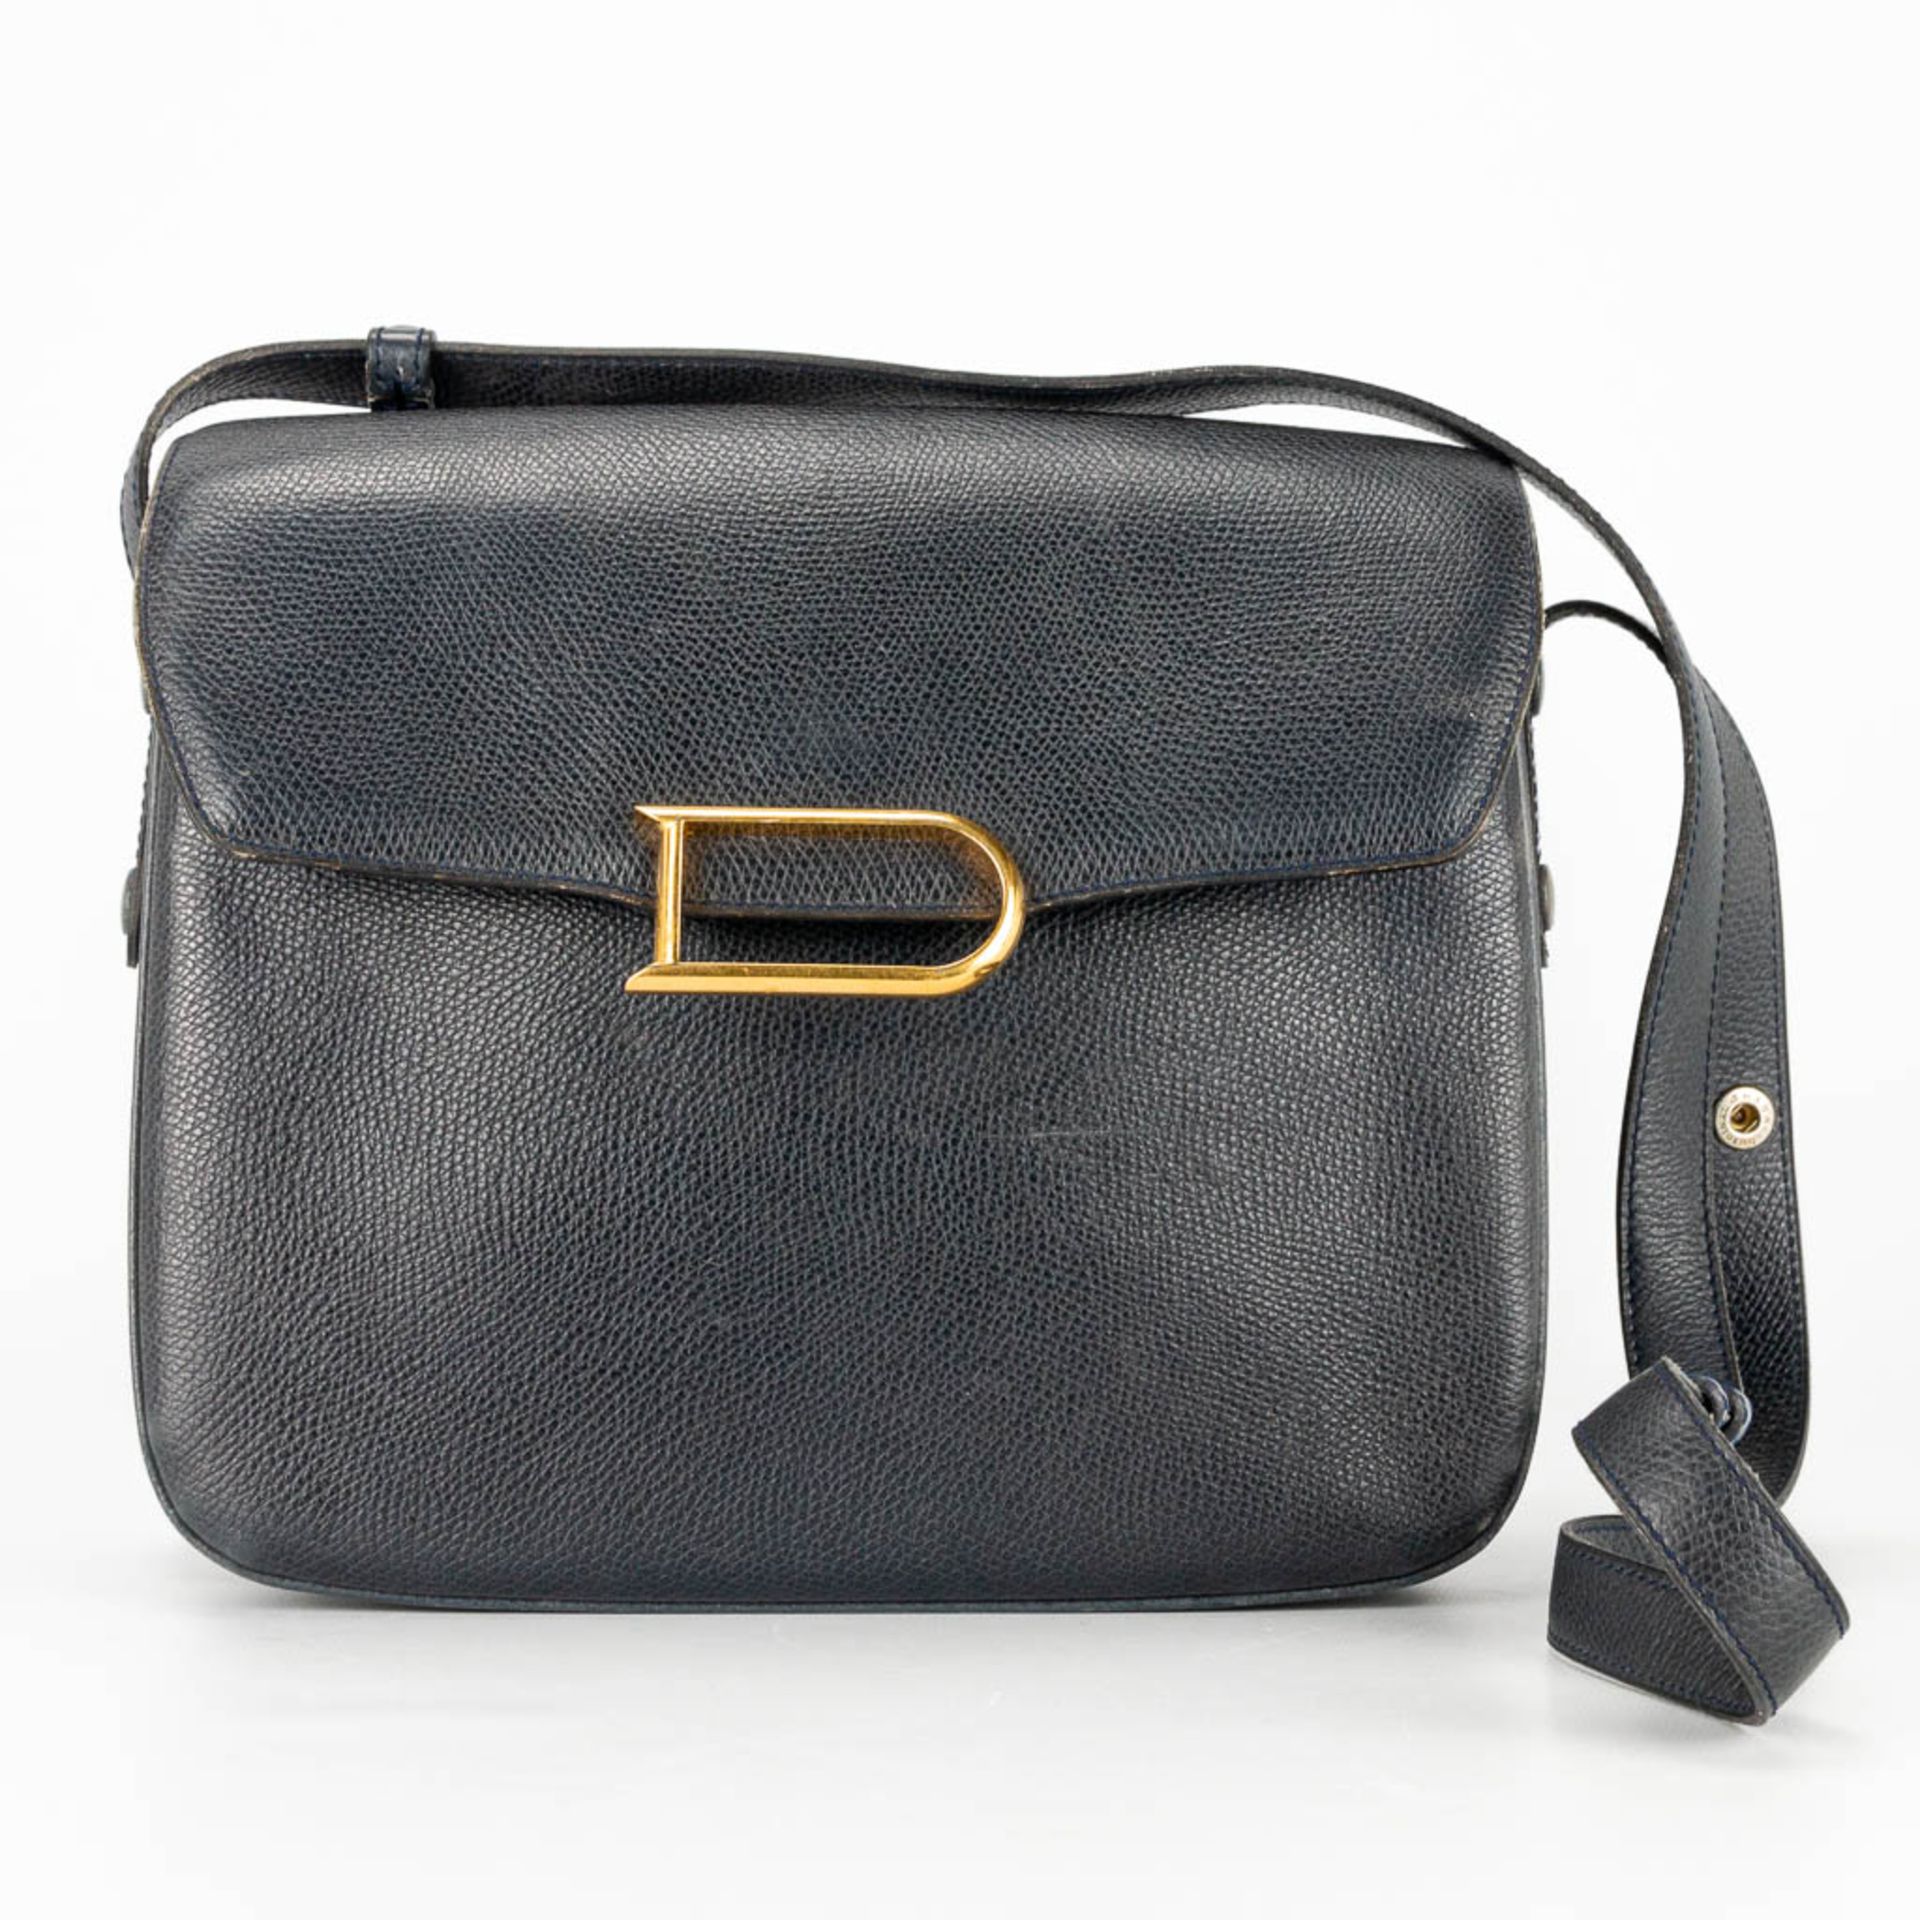 A purse made of black leather and marked Delvaux, with the original mirror.